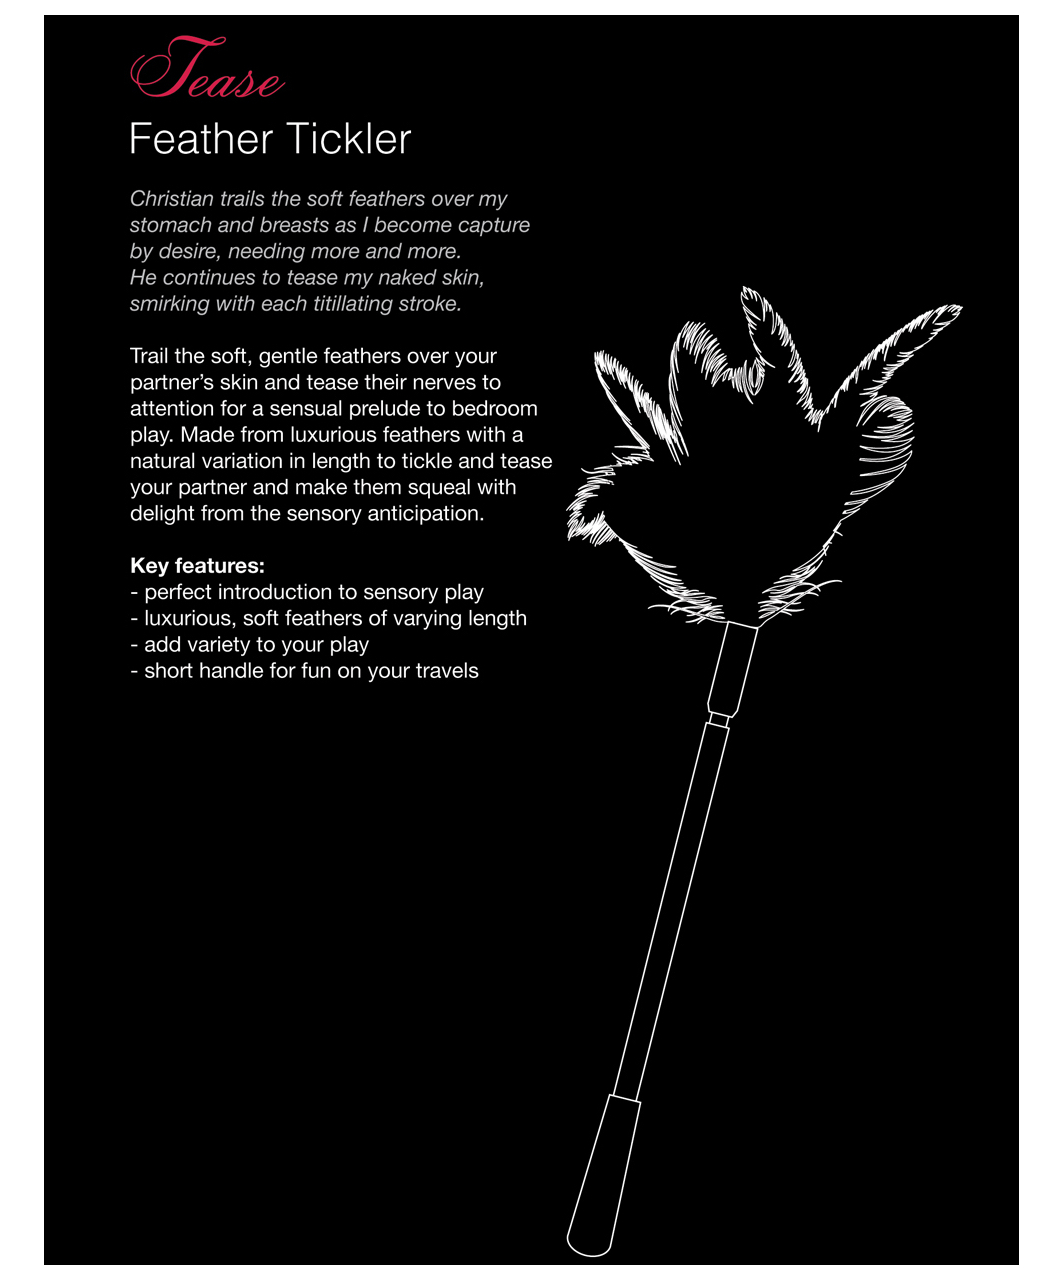 Fifty Shades of Grey Tease feather tickler